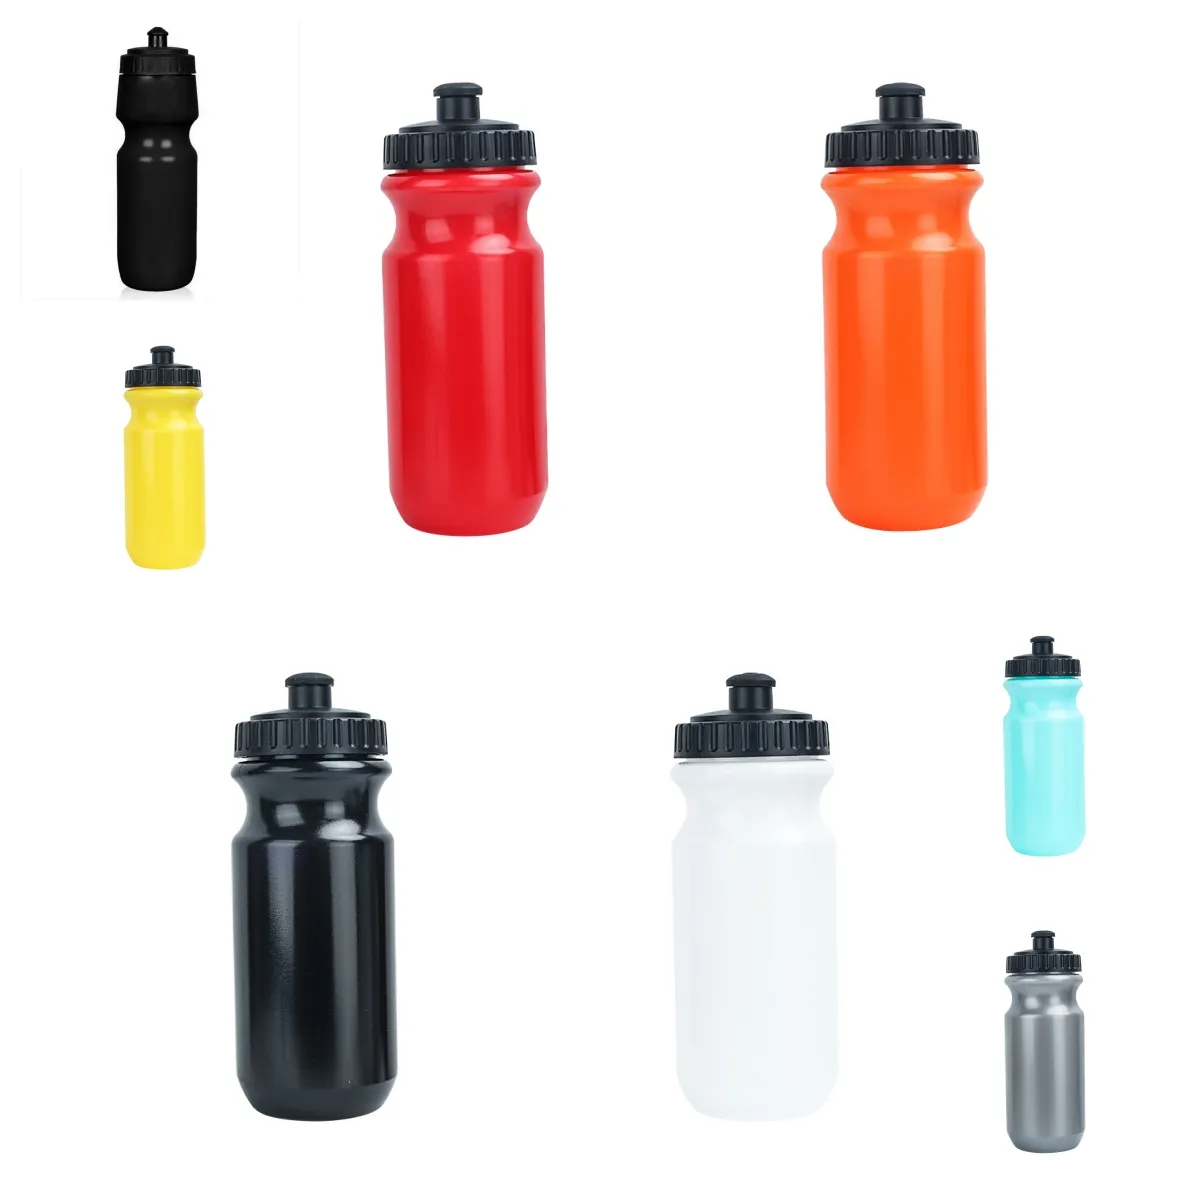 Sports bike squeeze water bottle bpa free plastic bottles 24 oz wide mouth lid water jug push pull insulated water bottles